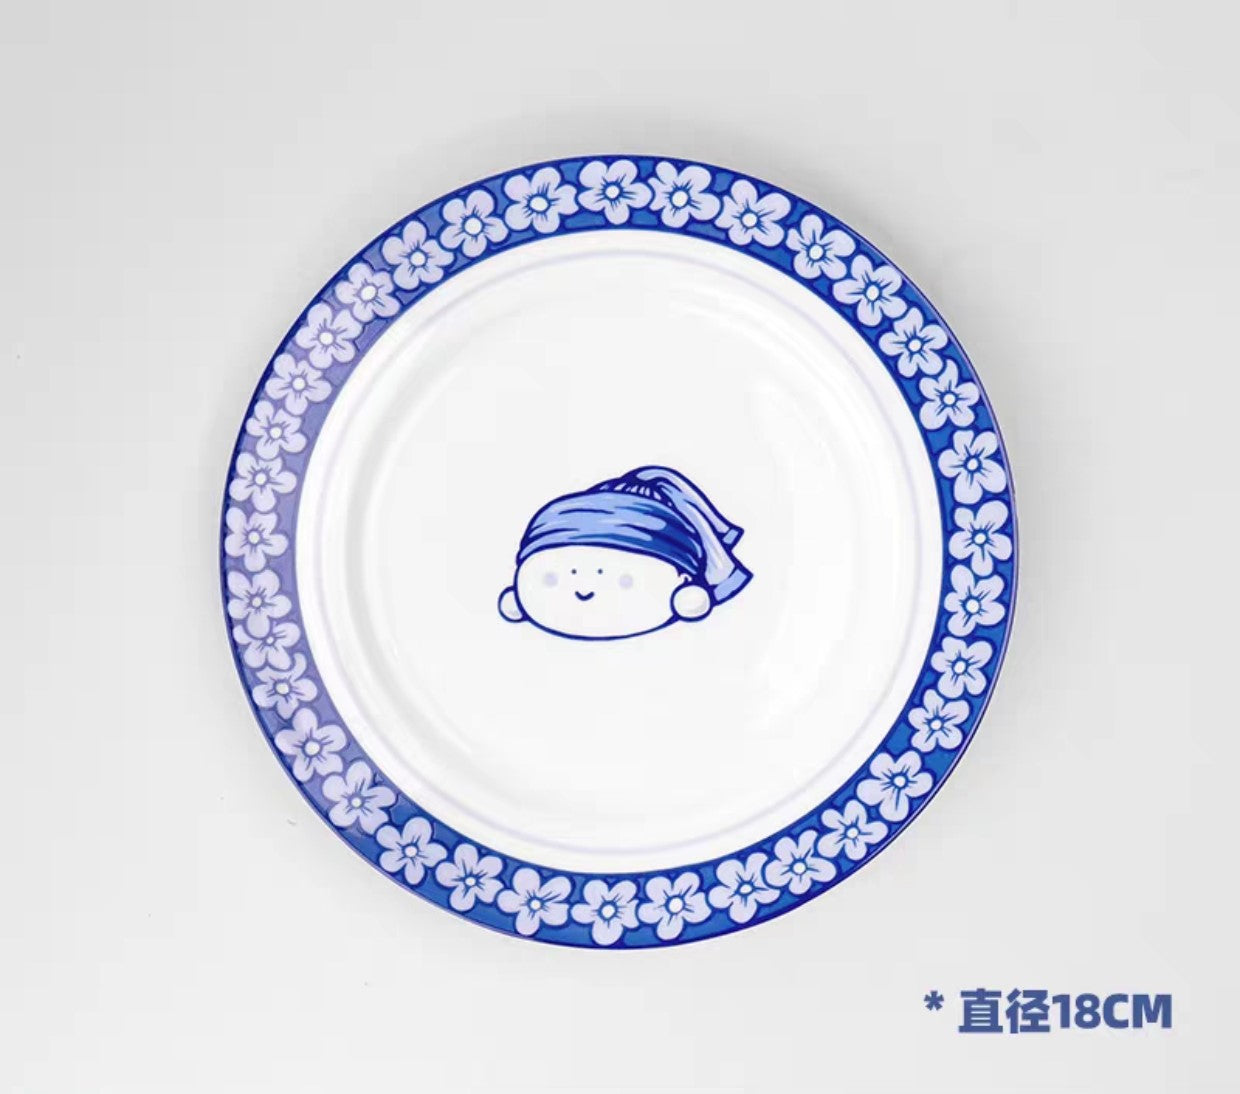 [BIG GALLERY]Great Artist - Blue and White Porcelain Series